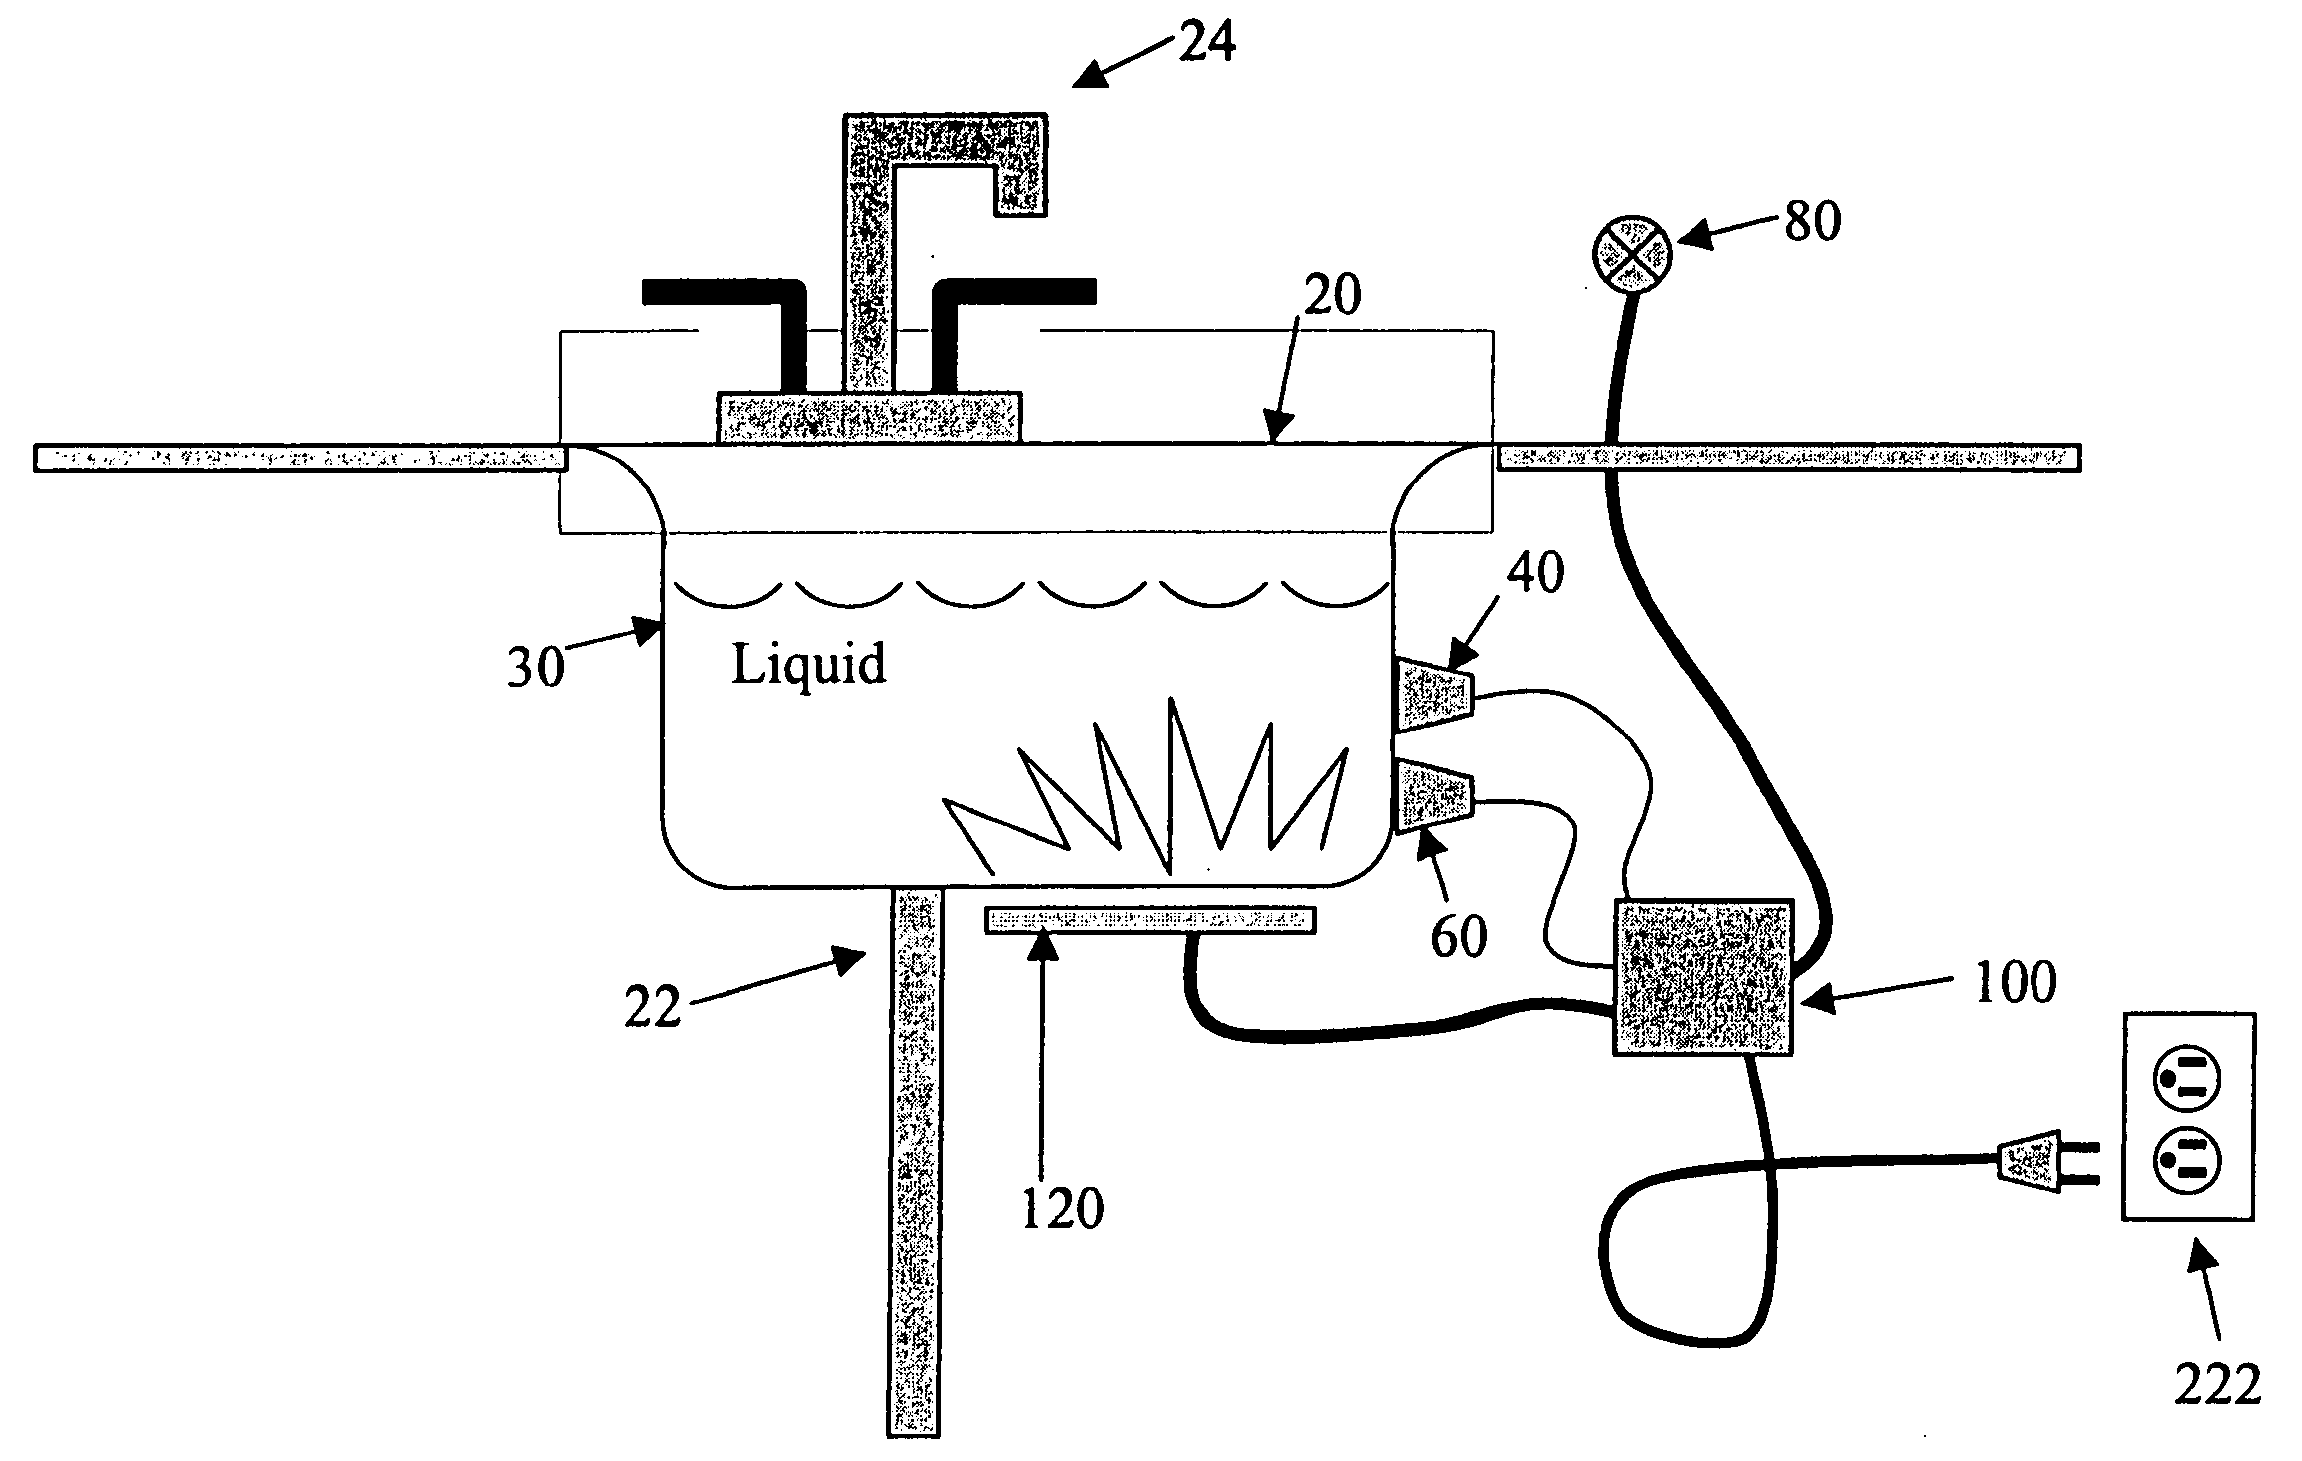 Apparatus for controlling the temperature of the water in a kitchen sink